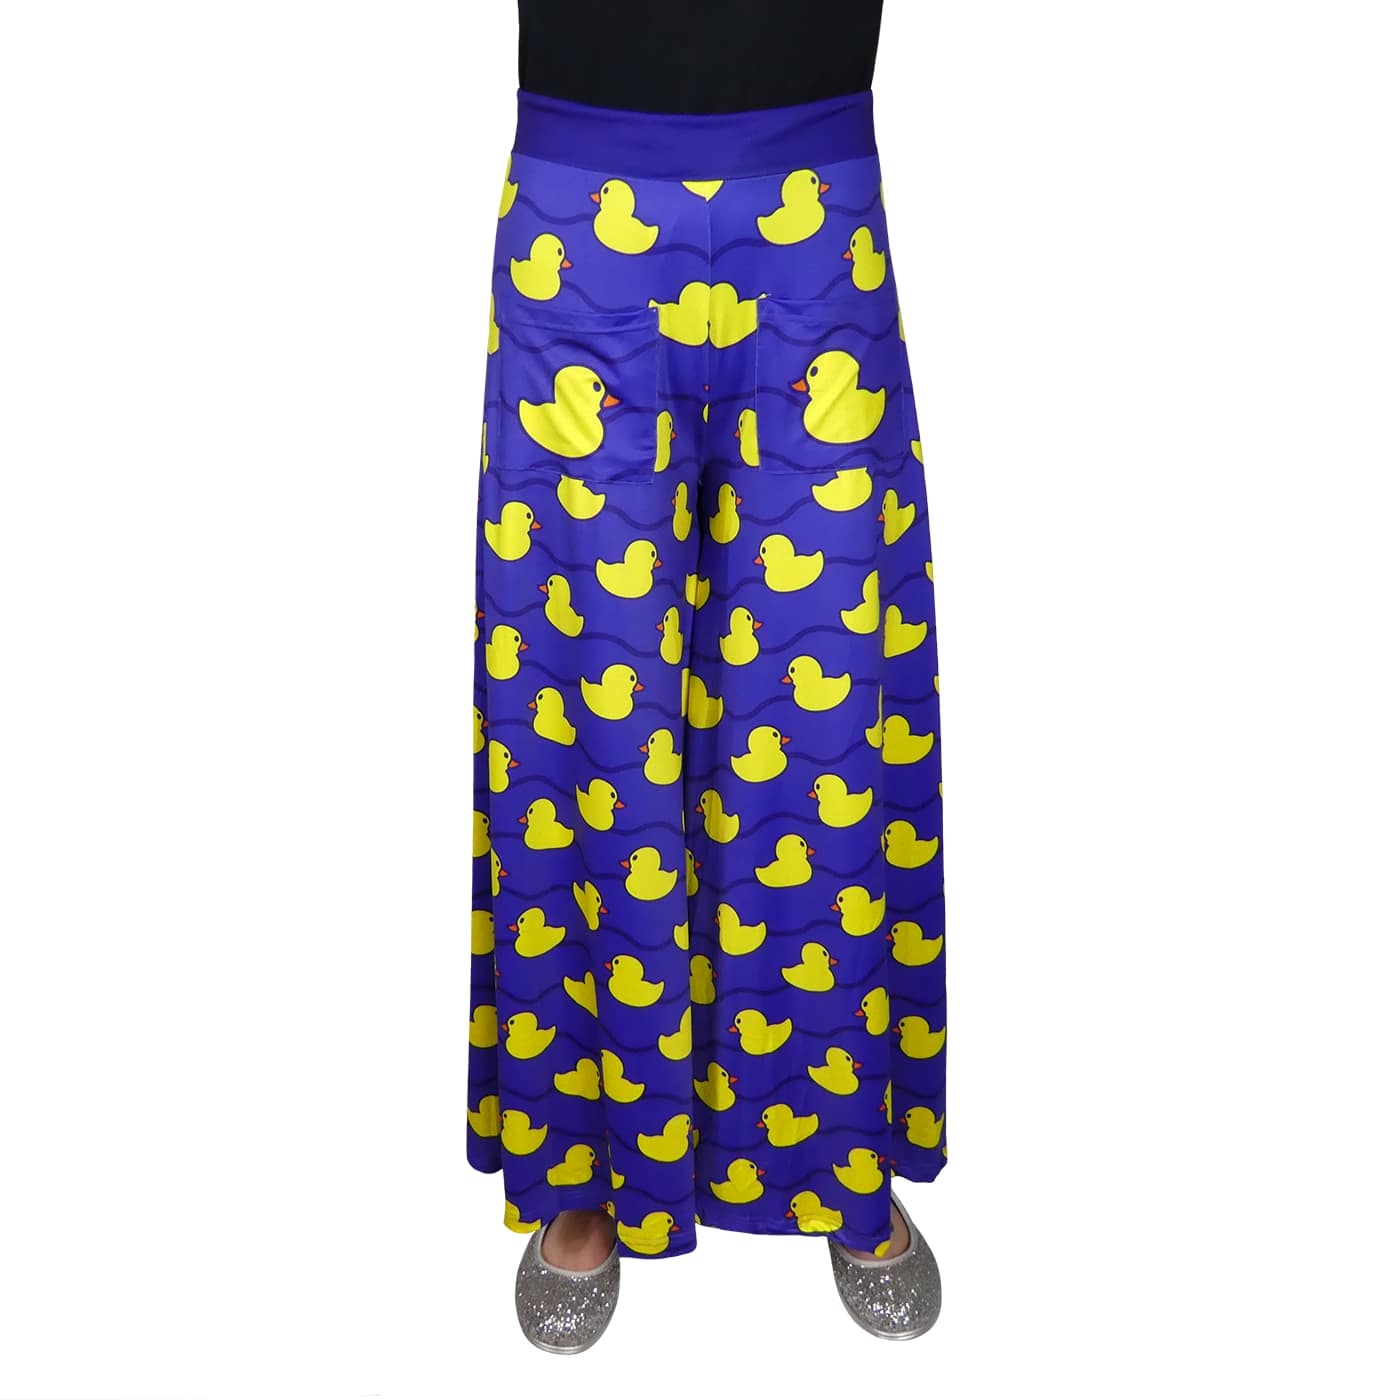 Yellow Ducky Wide Leg Pants by RainbowsAndFairies.com.au (Rubber Duck - Sesame St - Pants With Pockets - Pallzao Pants - Flares - Bell Bottoms) - SKU: CL_WIDEL_DUCKY_YEL - Pic-03